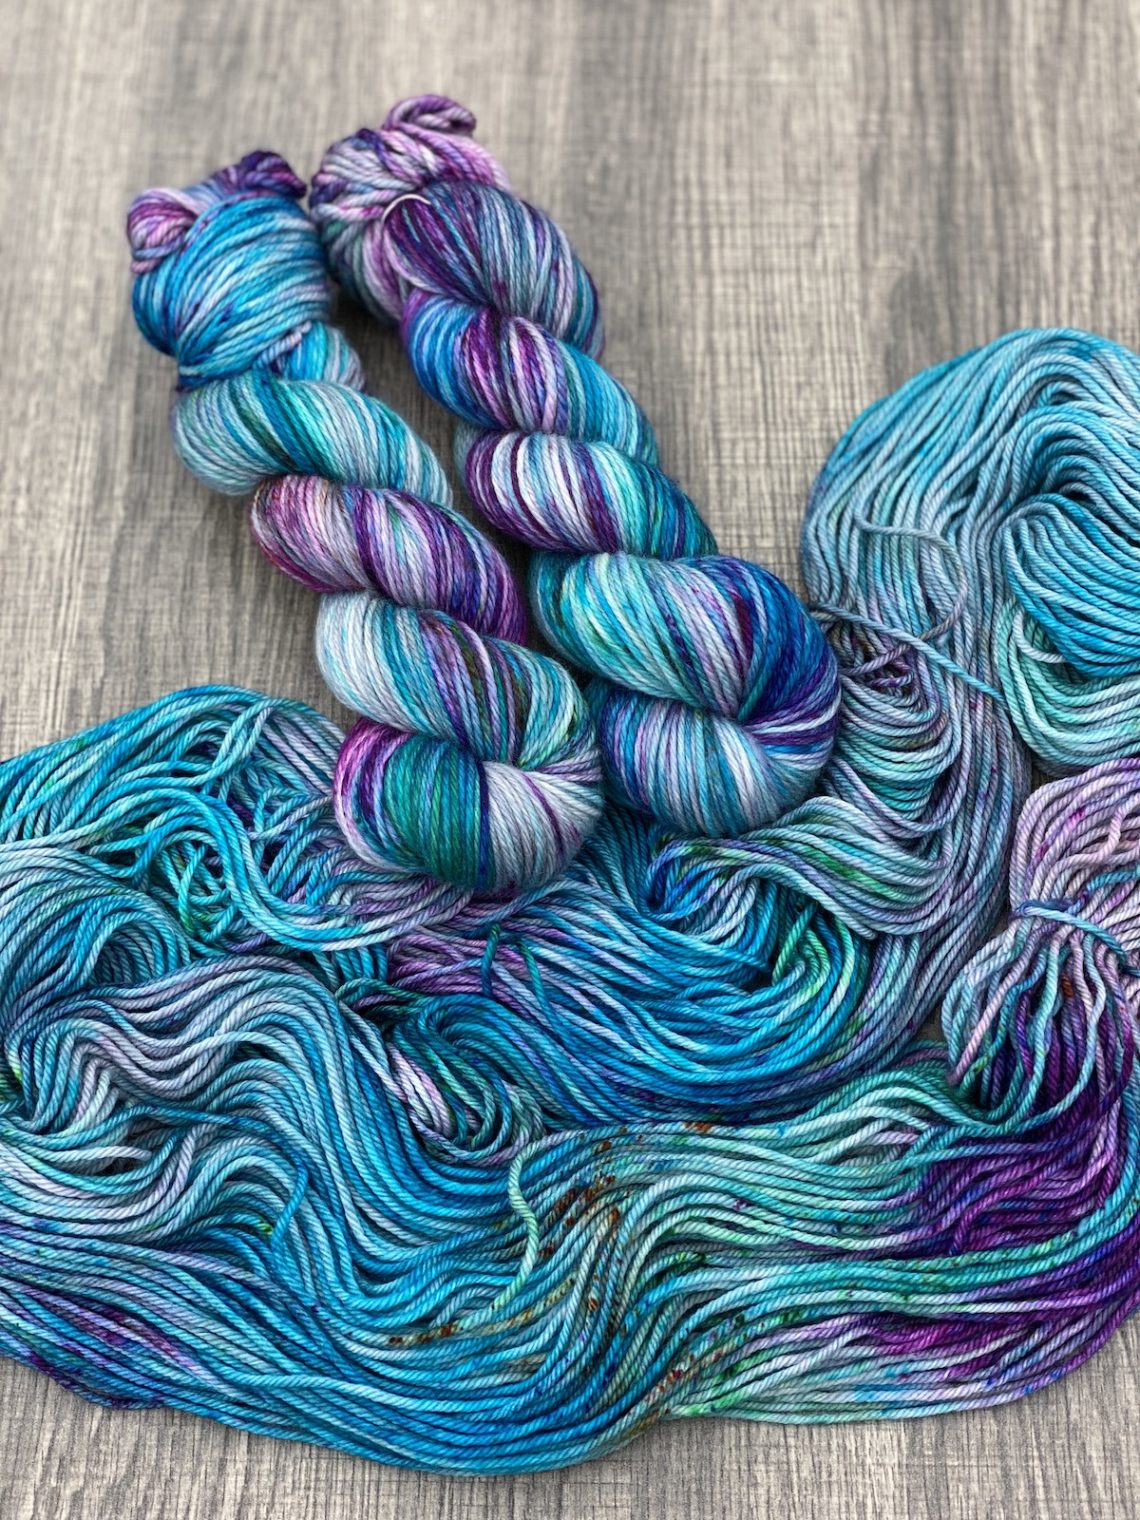 Crocheting with Hand Dyed Yarn: Tips for Finding Crochet Patterns